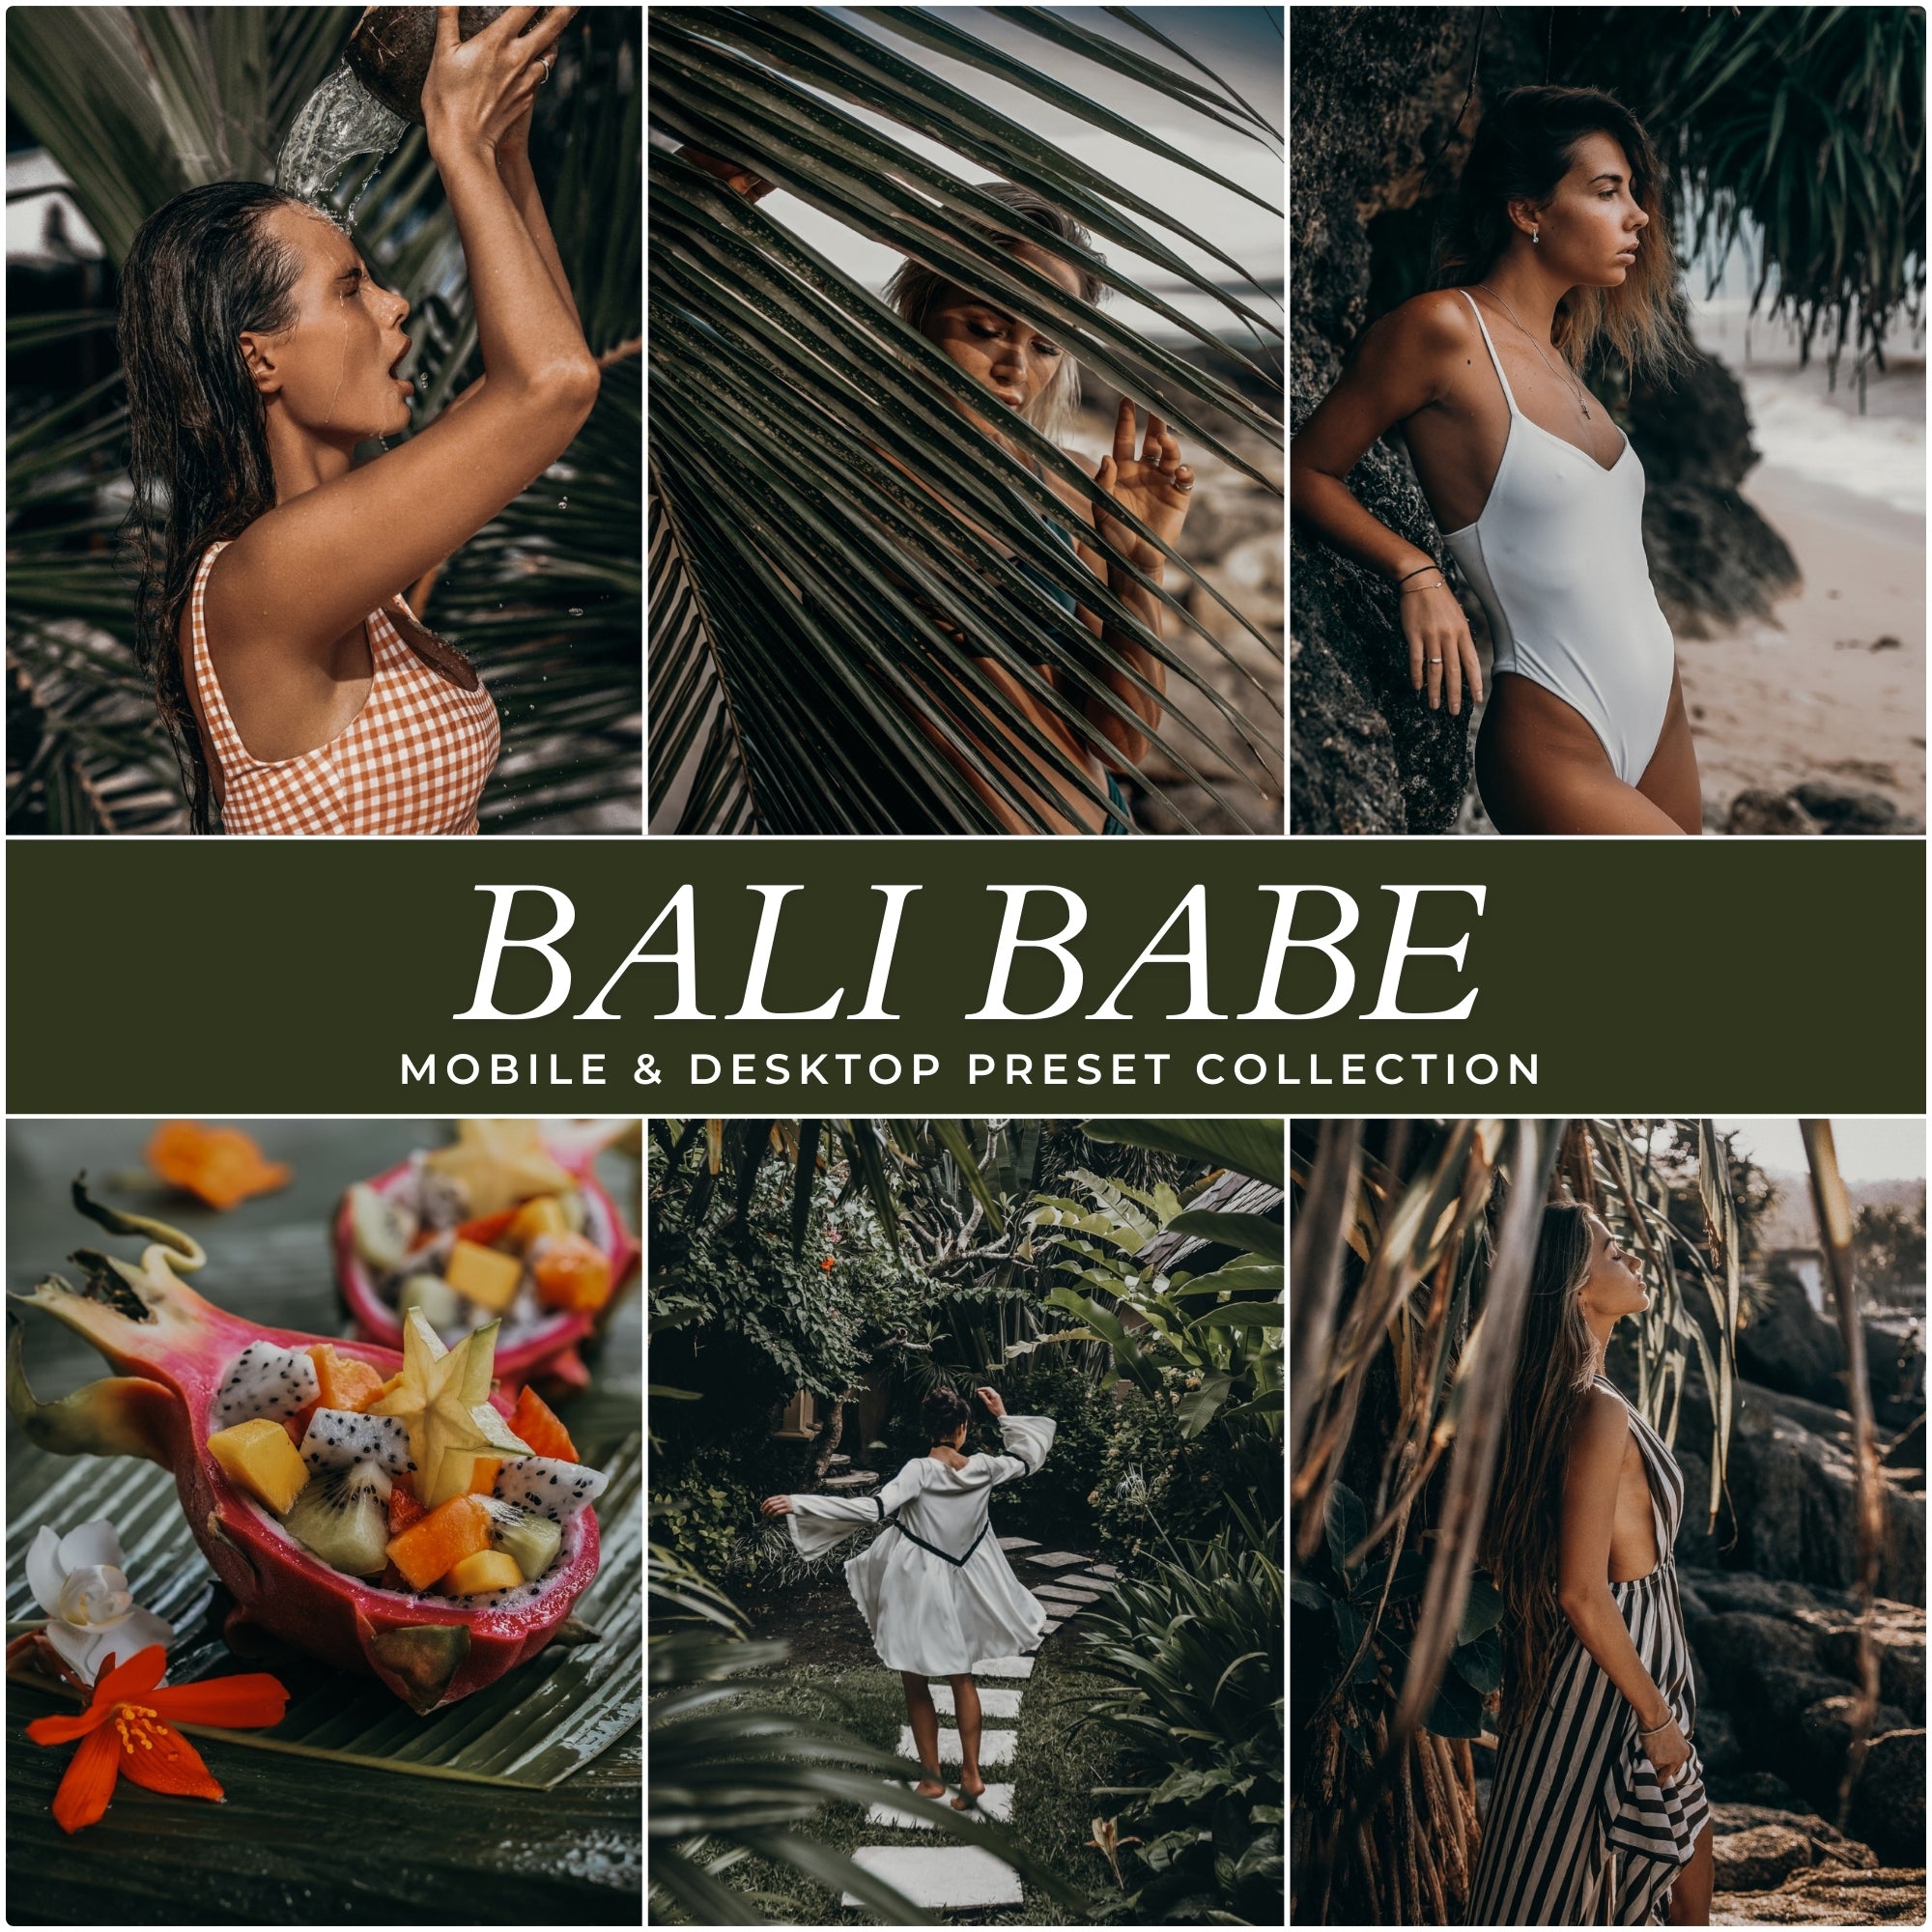 Bali Babe Moody Lightroom Presets For Photographers and Instagram Influencers Photo Editing In Adobe Lightroom By Lou And Marks Presets